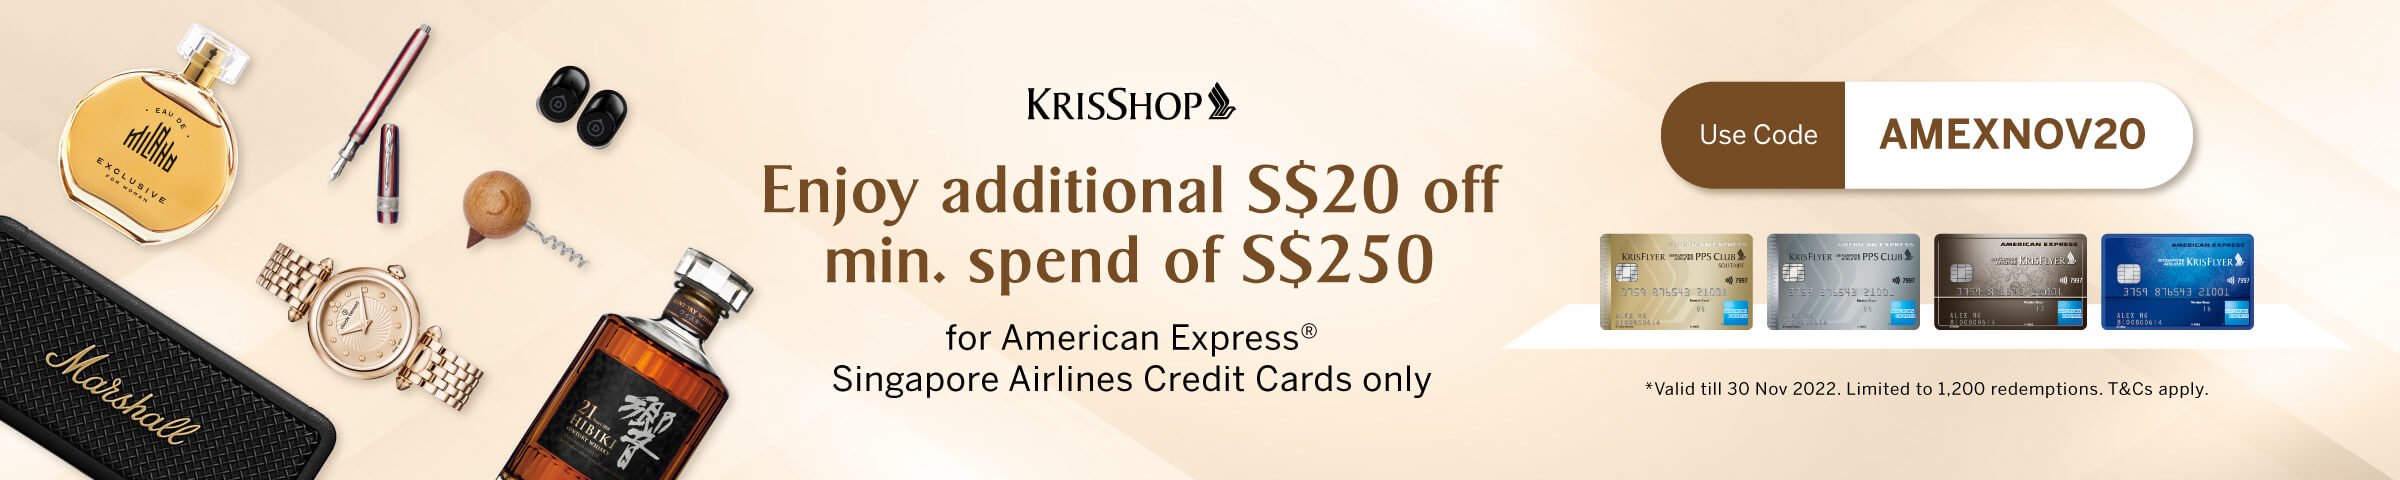 Exclusive Offer For Amex Singapore Airlines Credit Card Members: S$20 off with min. spend S$250